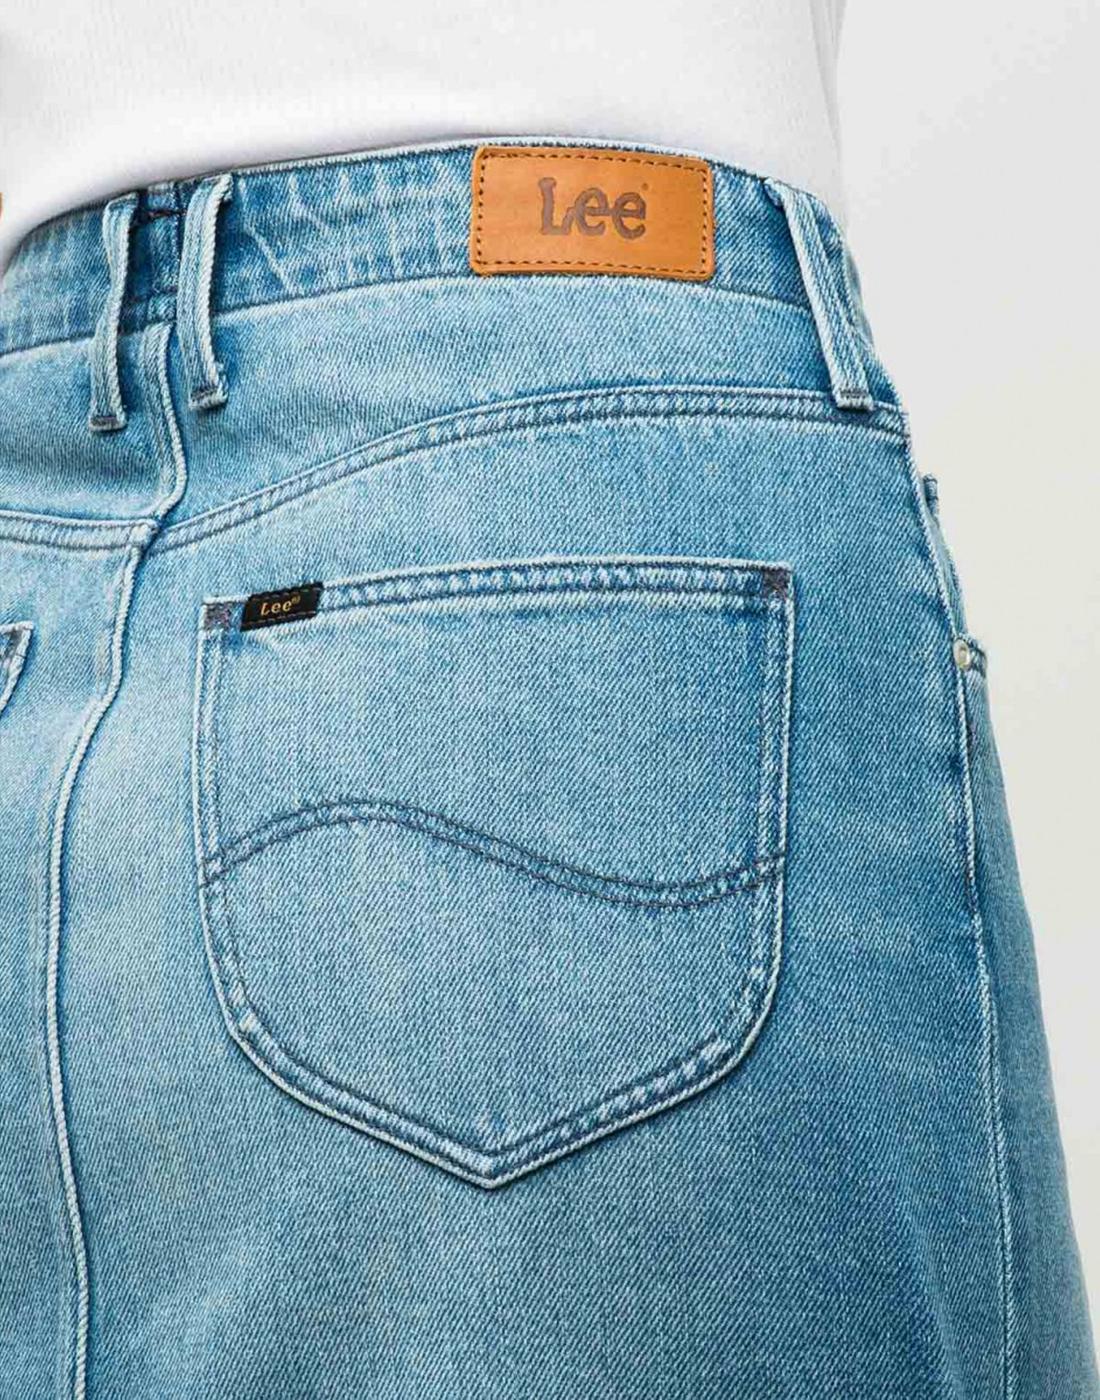 lee jeans 90s